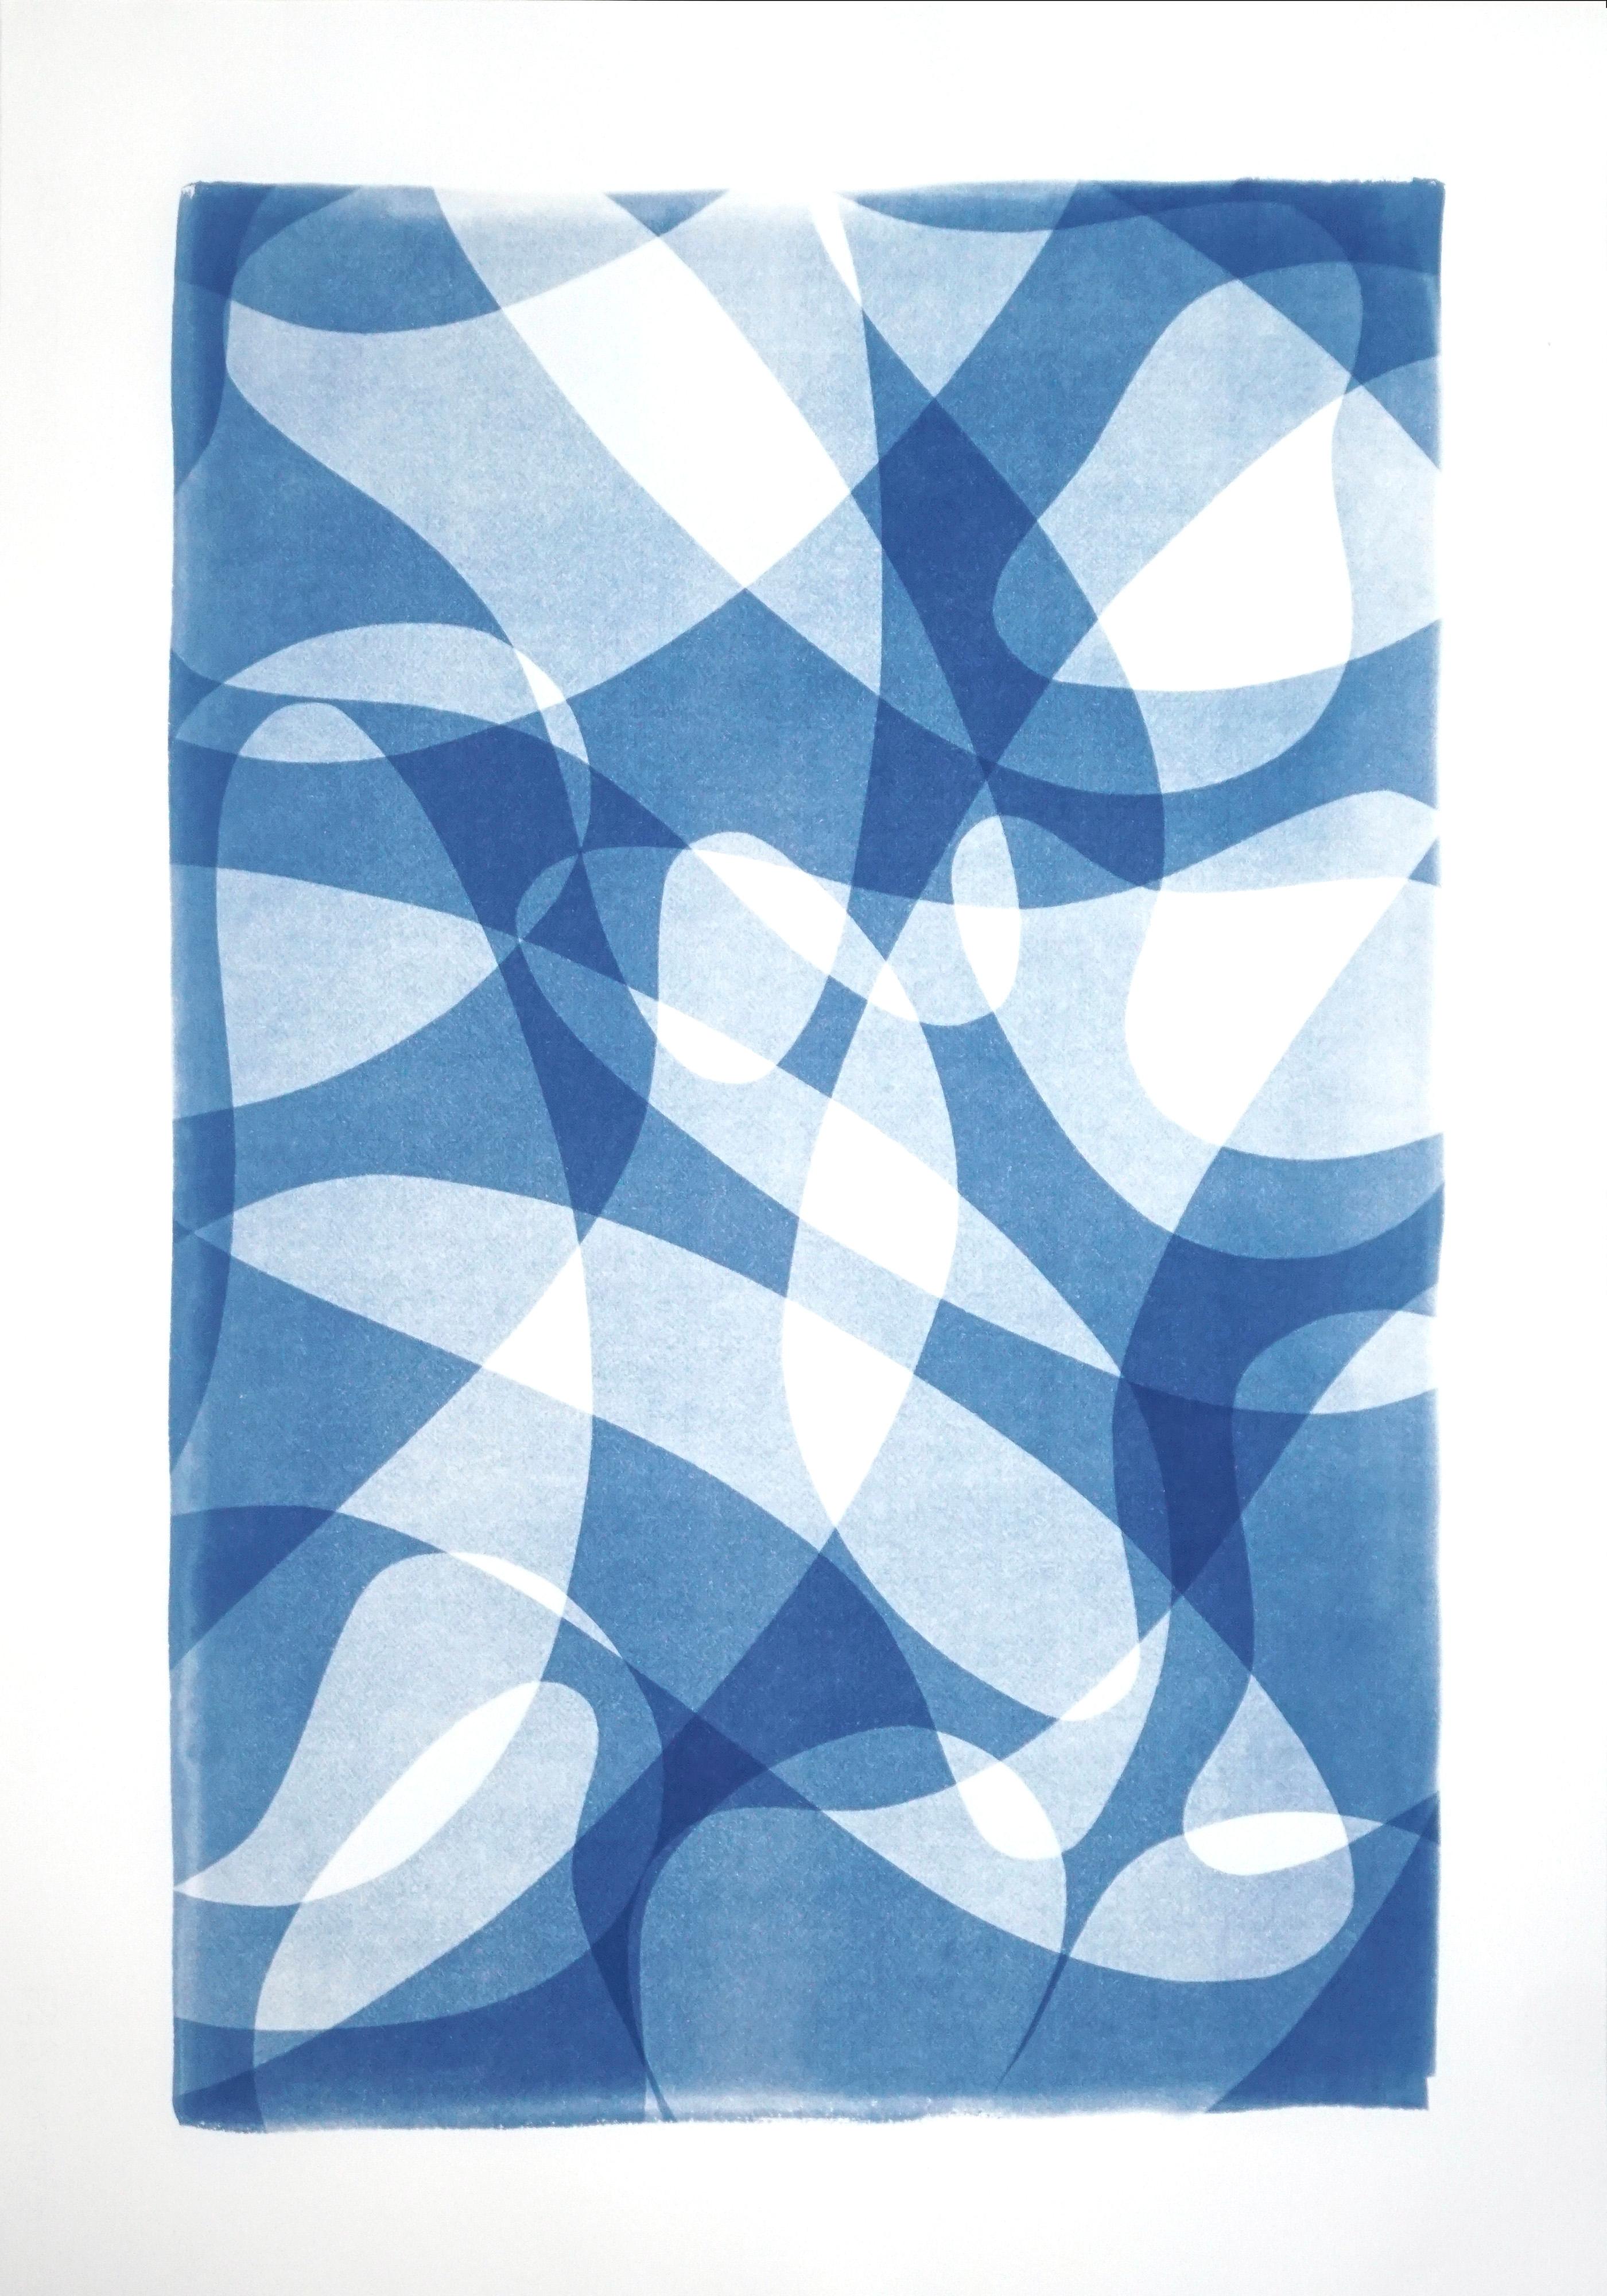 Kind of Cyan Abstract Print - Line Contours, Blue Shade Gradients, Unique Handmade Monotype, Avant Garde 2021